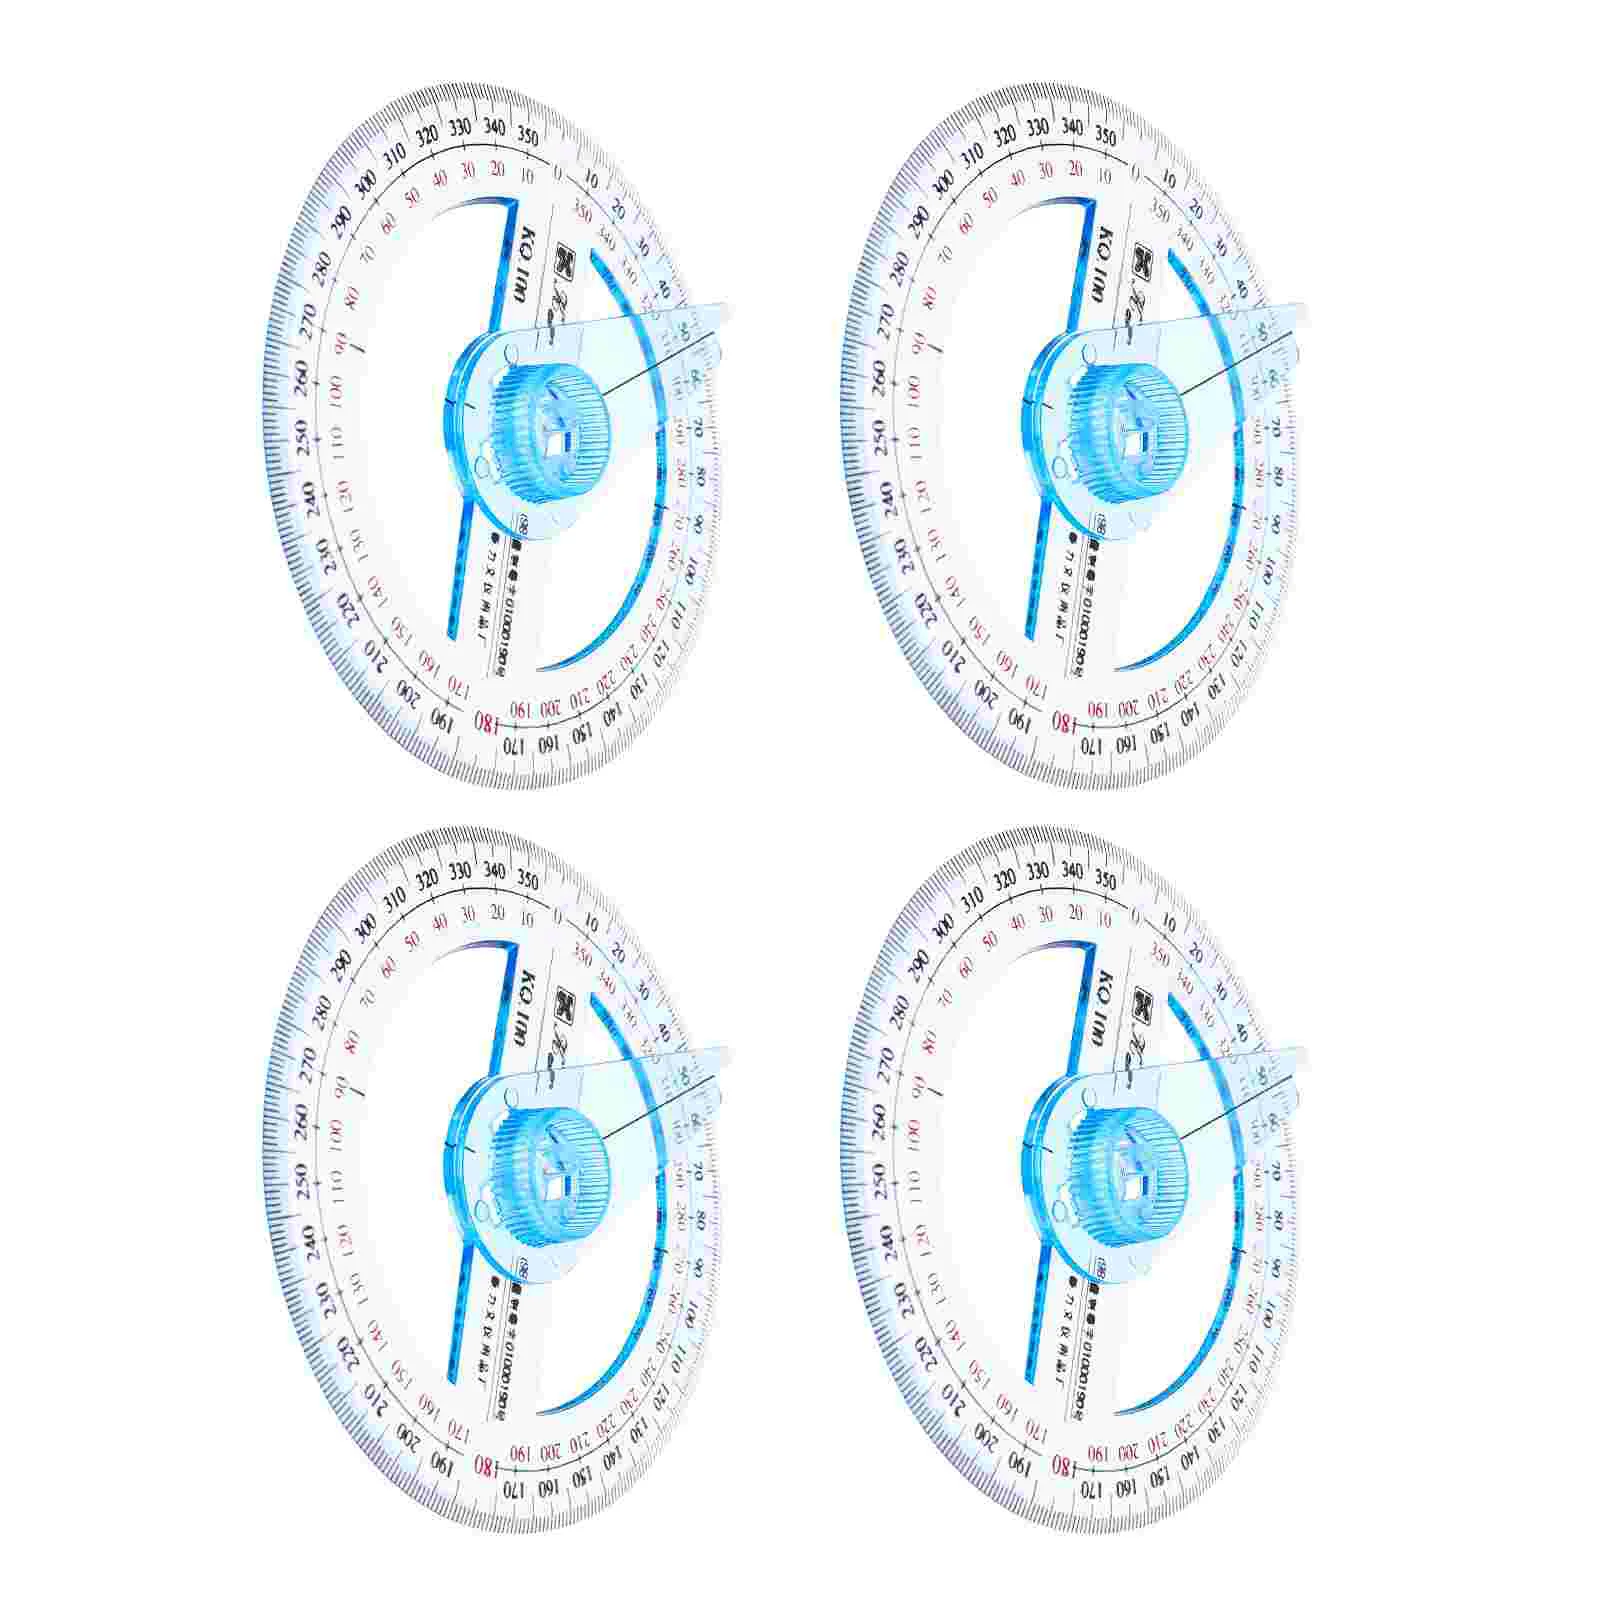 4Pcs Professional Plastic Circle Protractor Math Geometry Measuring Circle Ruler for Students 360 degrees protractor with swing arm full circle pointer angle ruler math geometry drafting tools for students design uy8